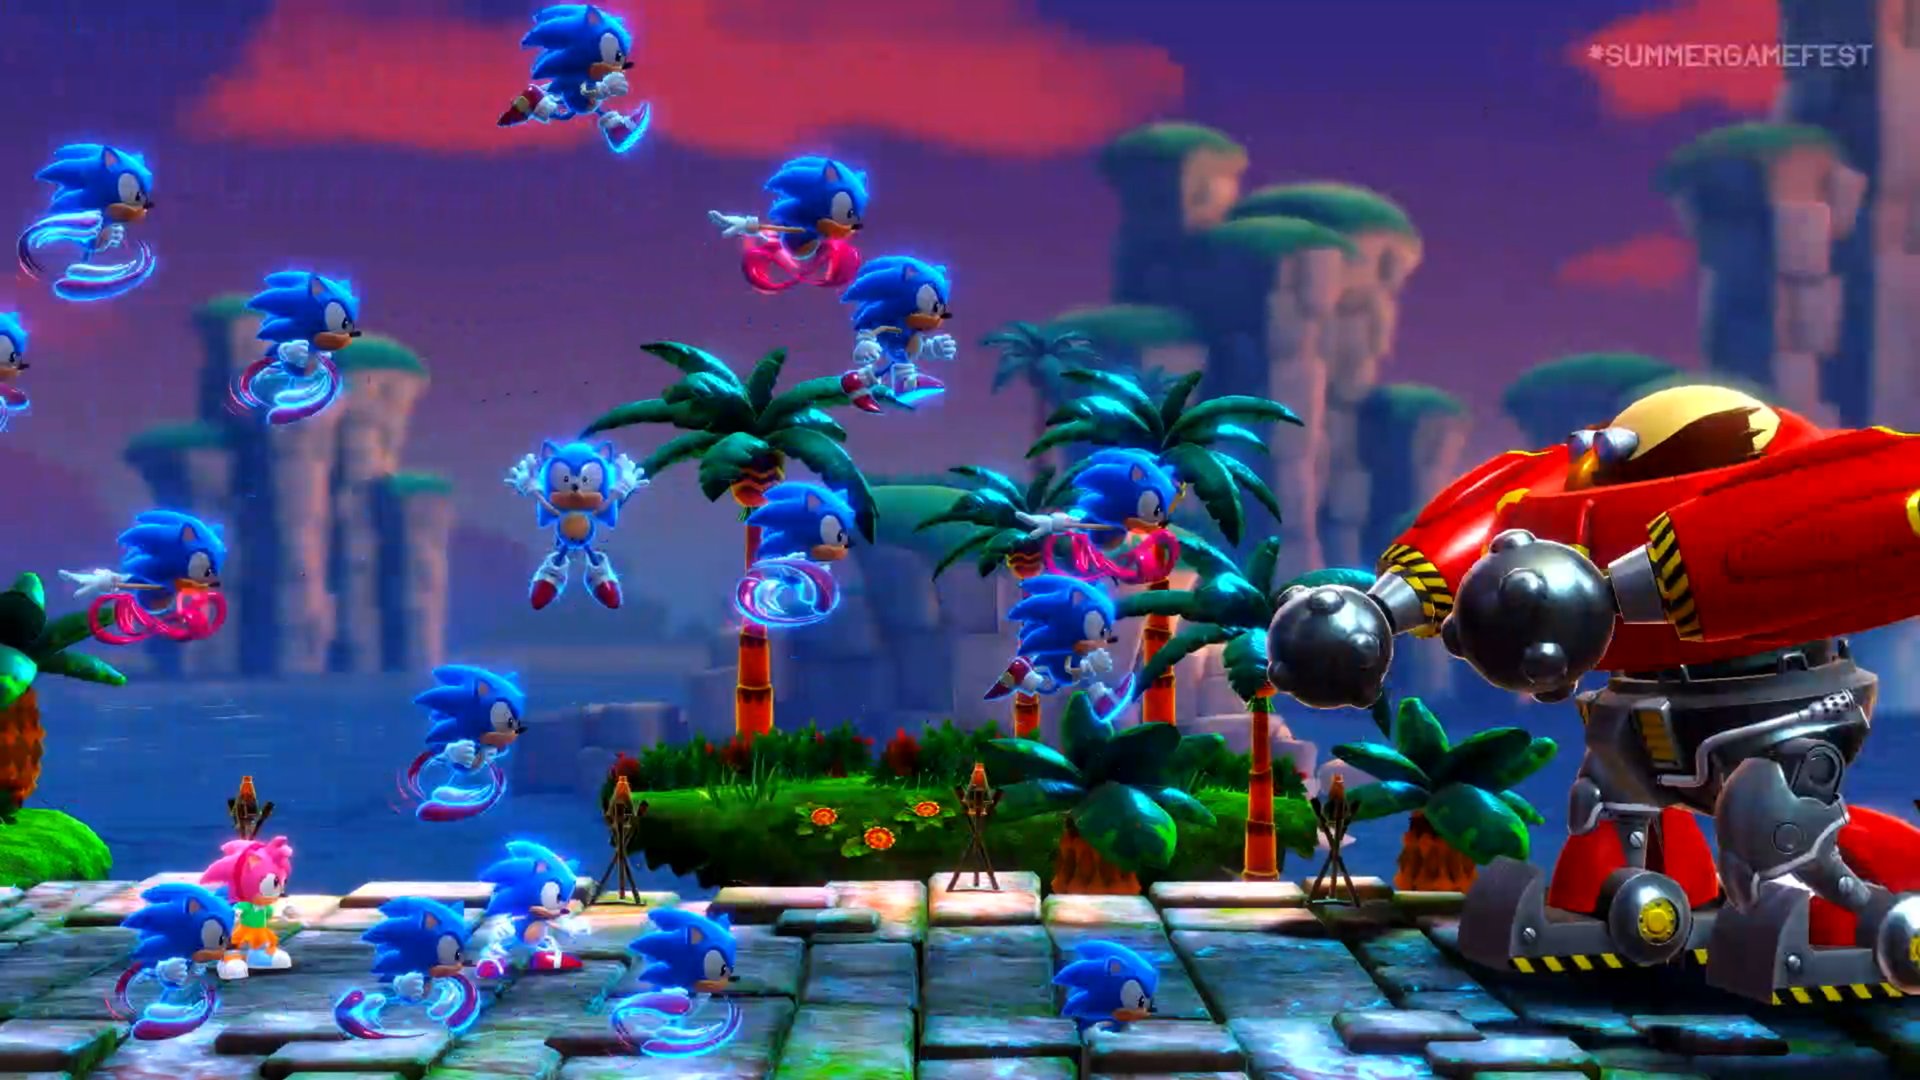 Sonic Colors Video Games for sale